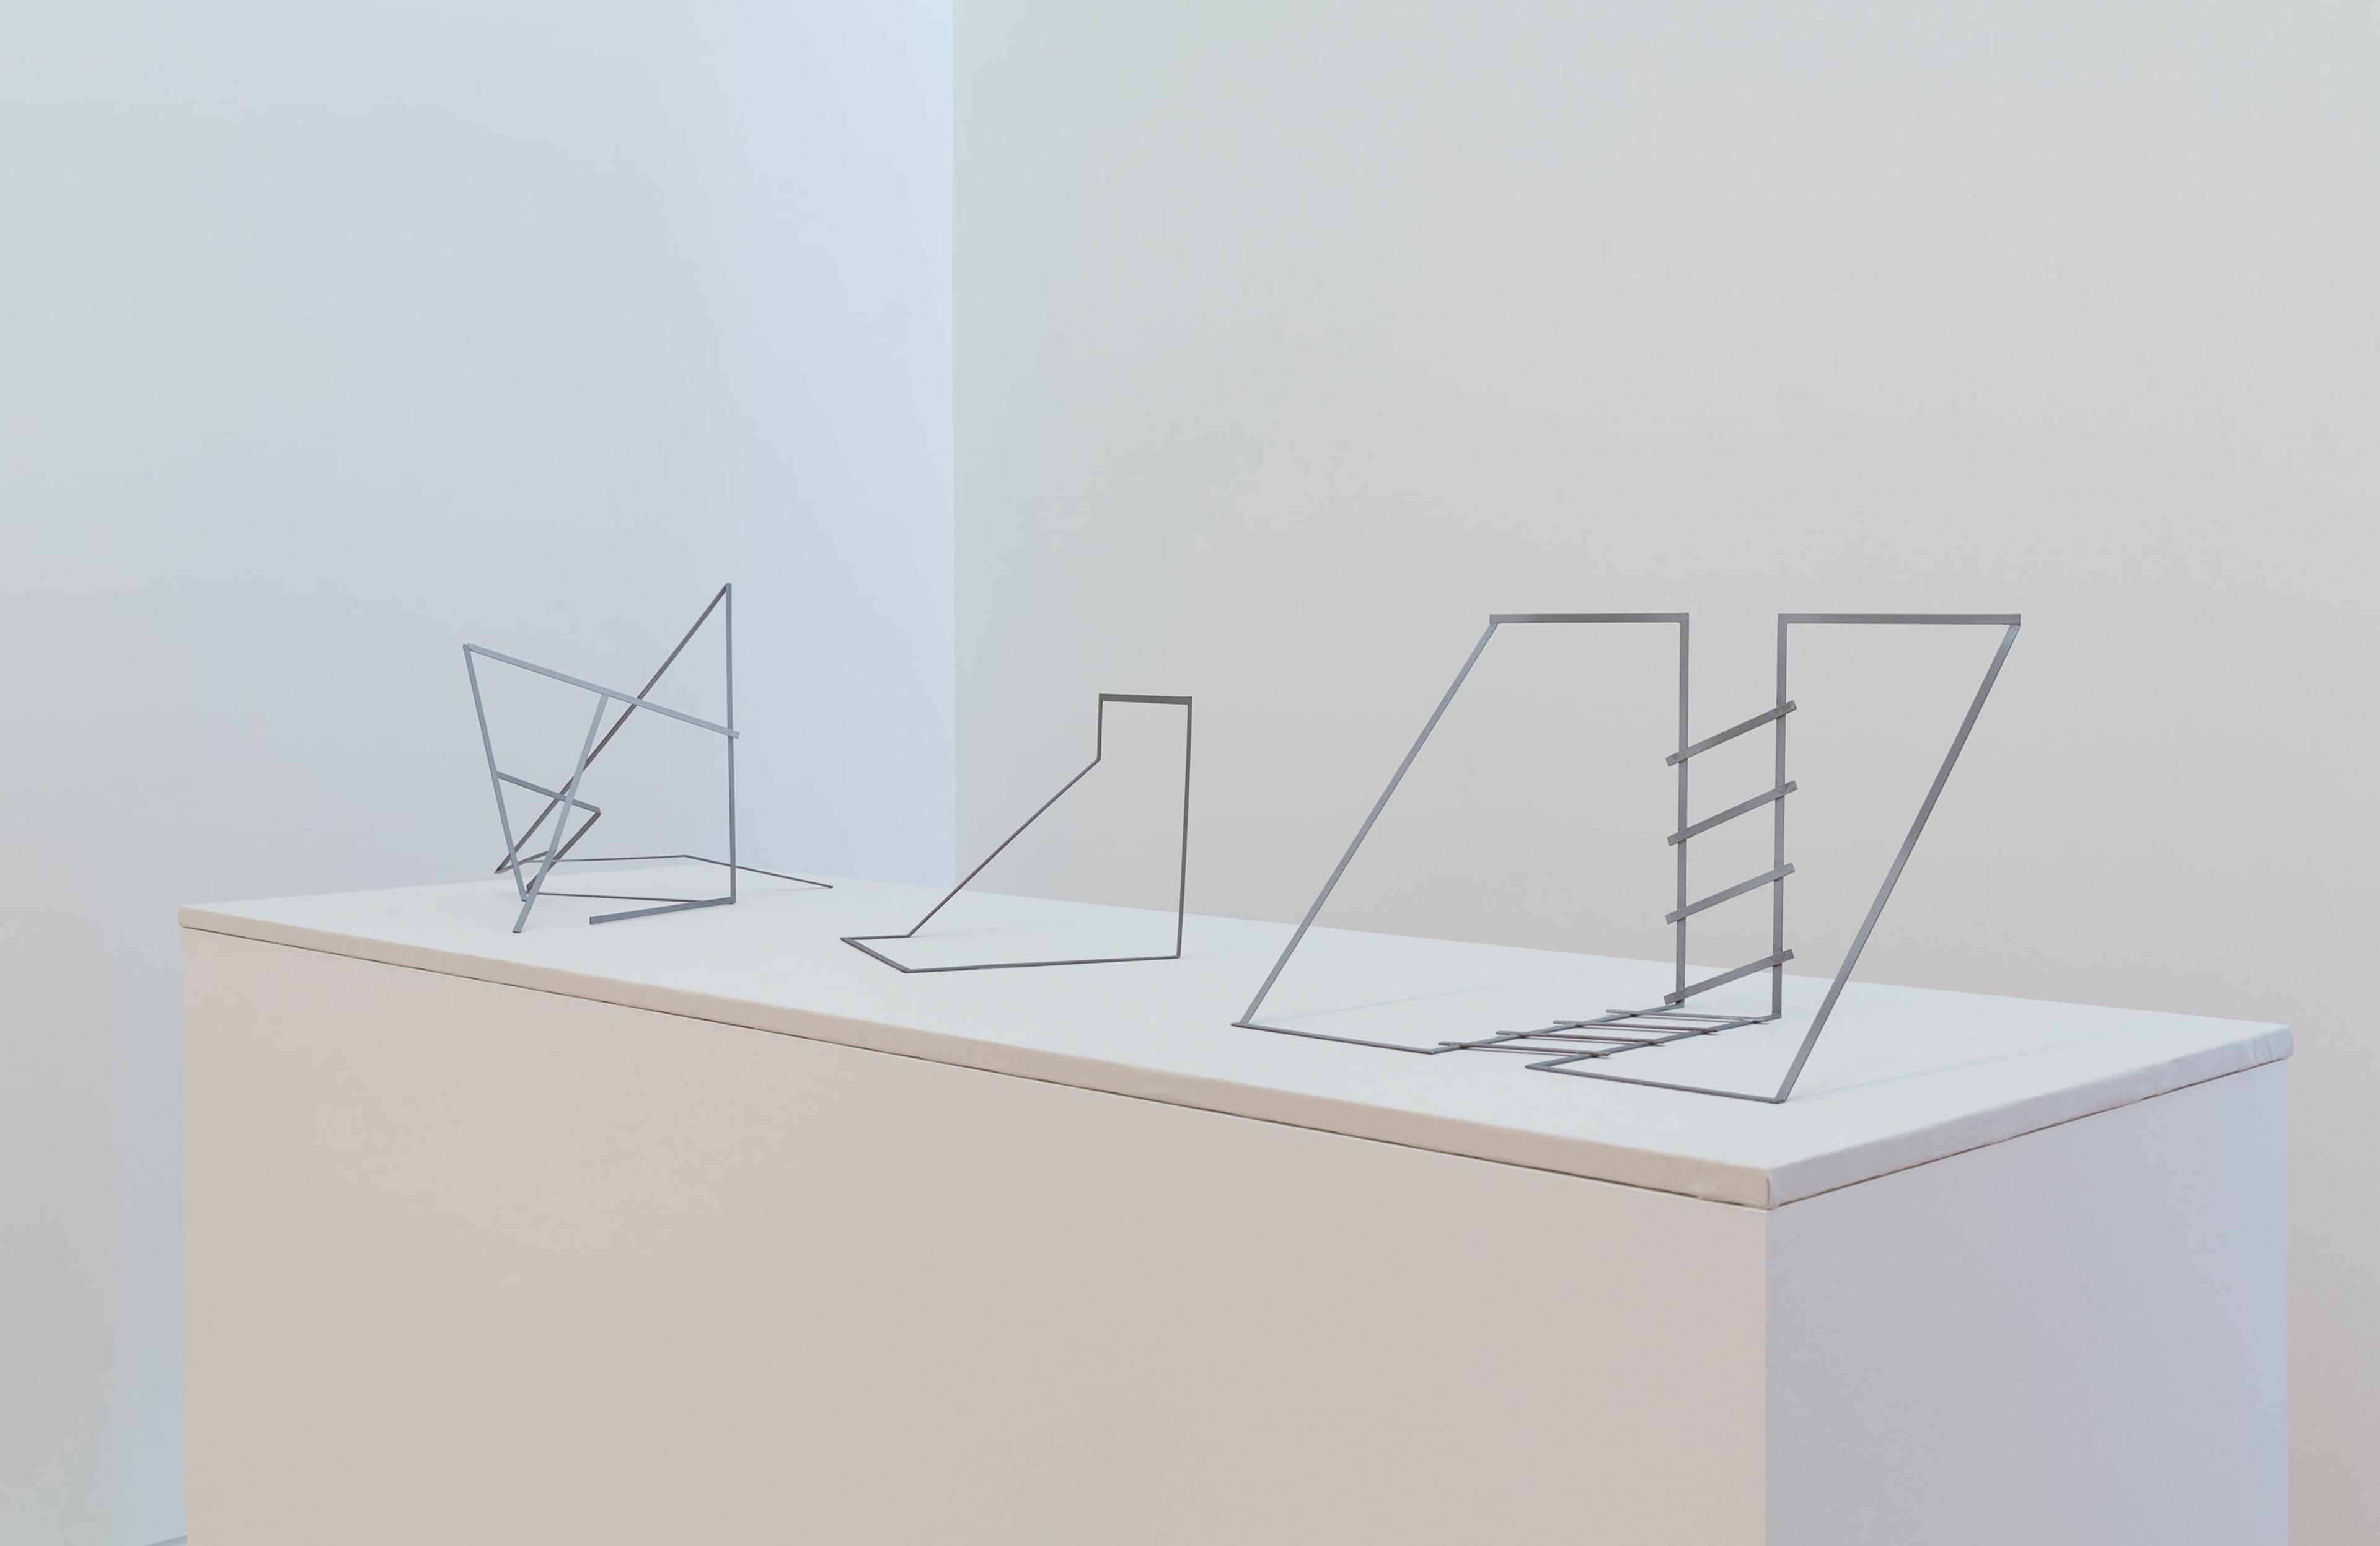 Installation view of John Panting: Spatial Constructions at the Adam Art Gallery, showing Untitled, circa 1972, mild steel and aluminium paint. Collection of Museum of New Zealand Te Papa Tongarewa. Photo: Shaun Waugh.